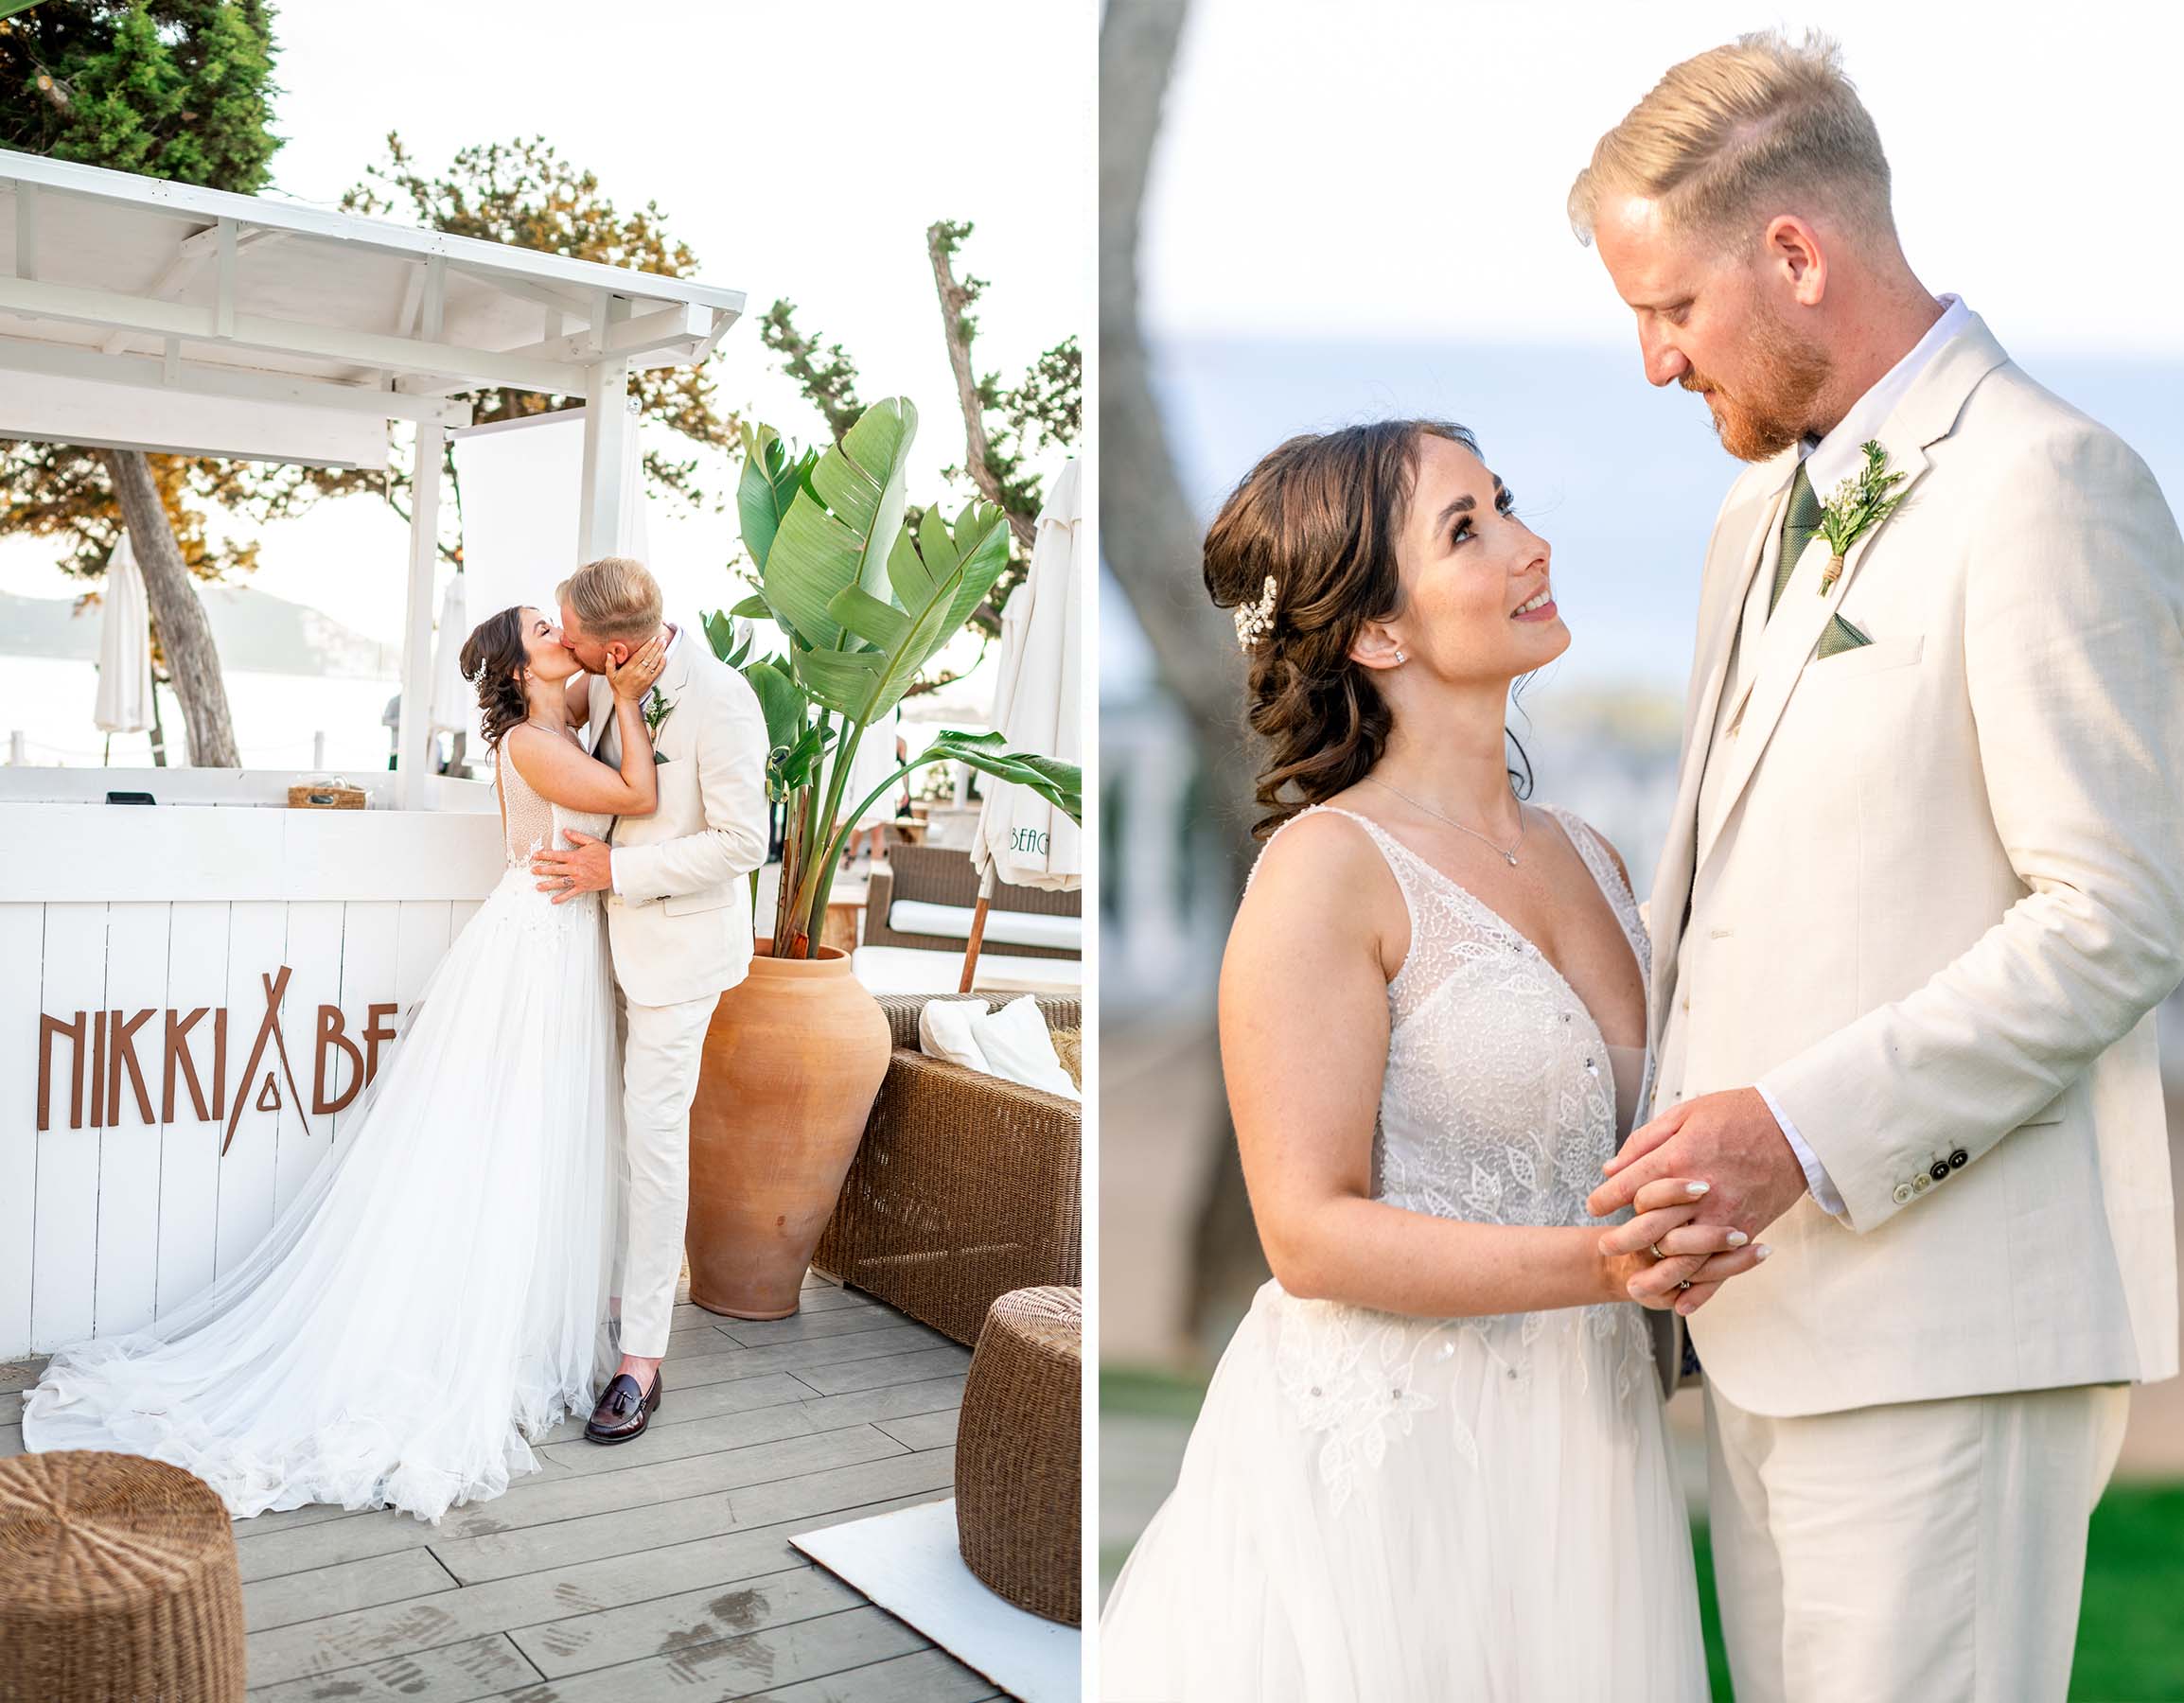 https://usercontent.one/wp/www.natalieandmaxphotofilms.com/wp-content/uploads/2024/02/Ibiza-Wedding-Photography-by-Natalie-and-Max-Photo-and-Films-Portfolio.jpg?media=1694090319